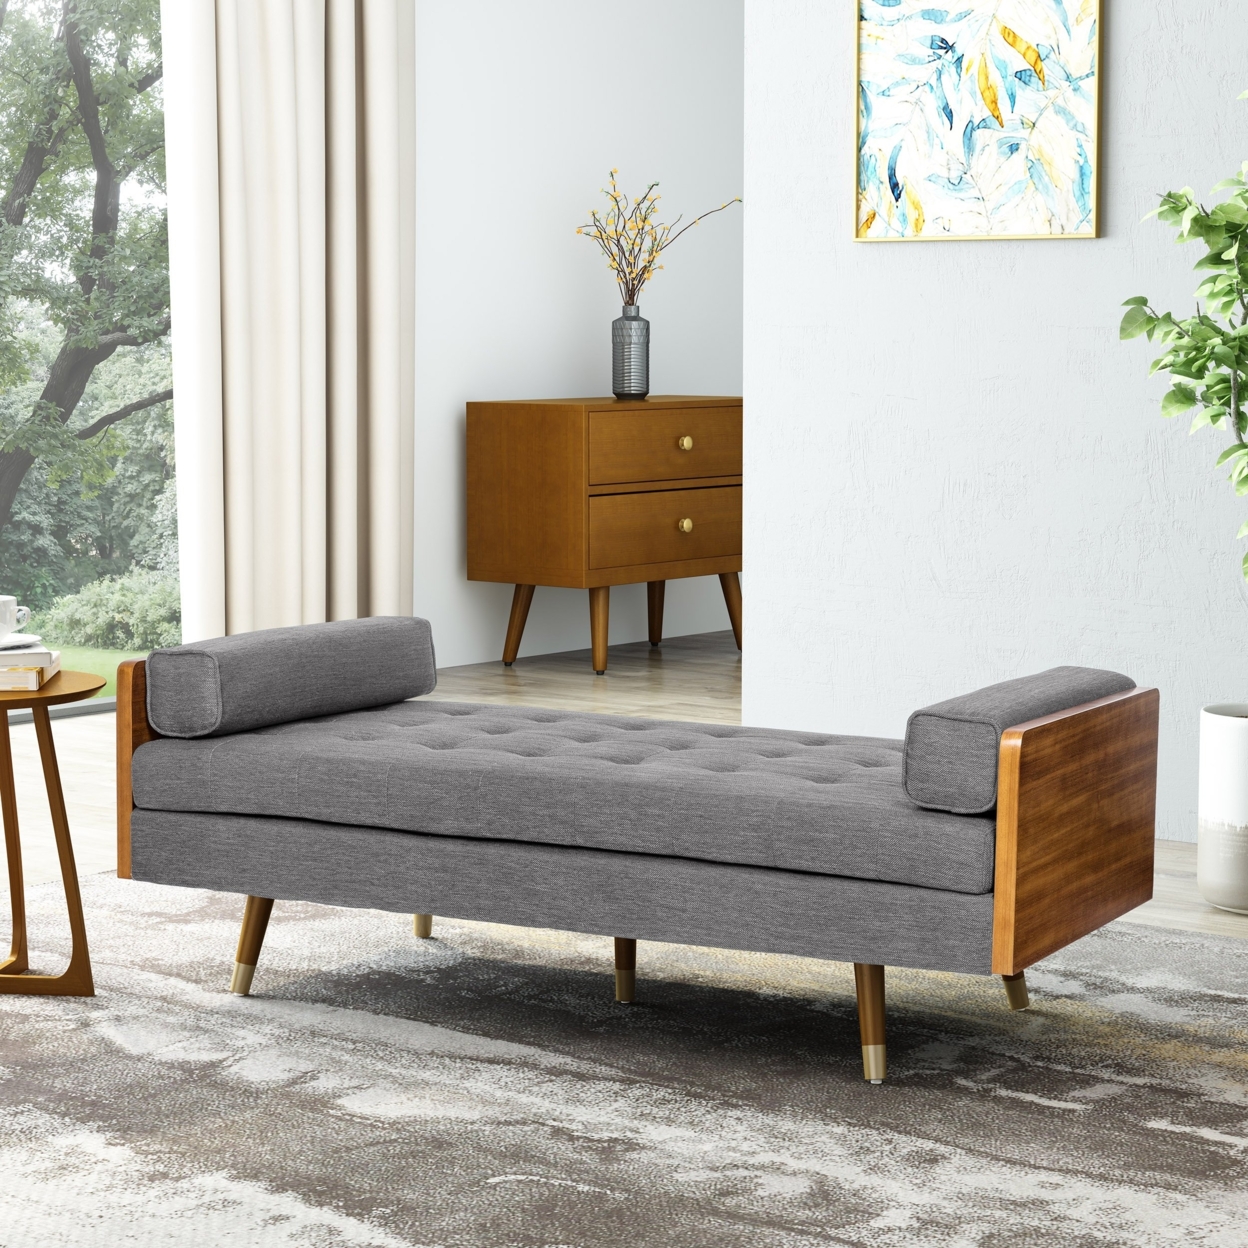 Tiltonsville Mid-Century Modern Tufted Double End Chaise Lounge With Bolster Pillows - Dark Walnut With Golden/beige